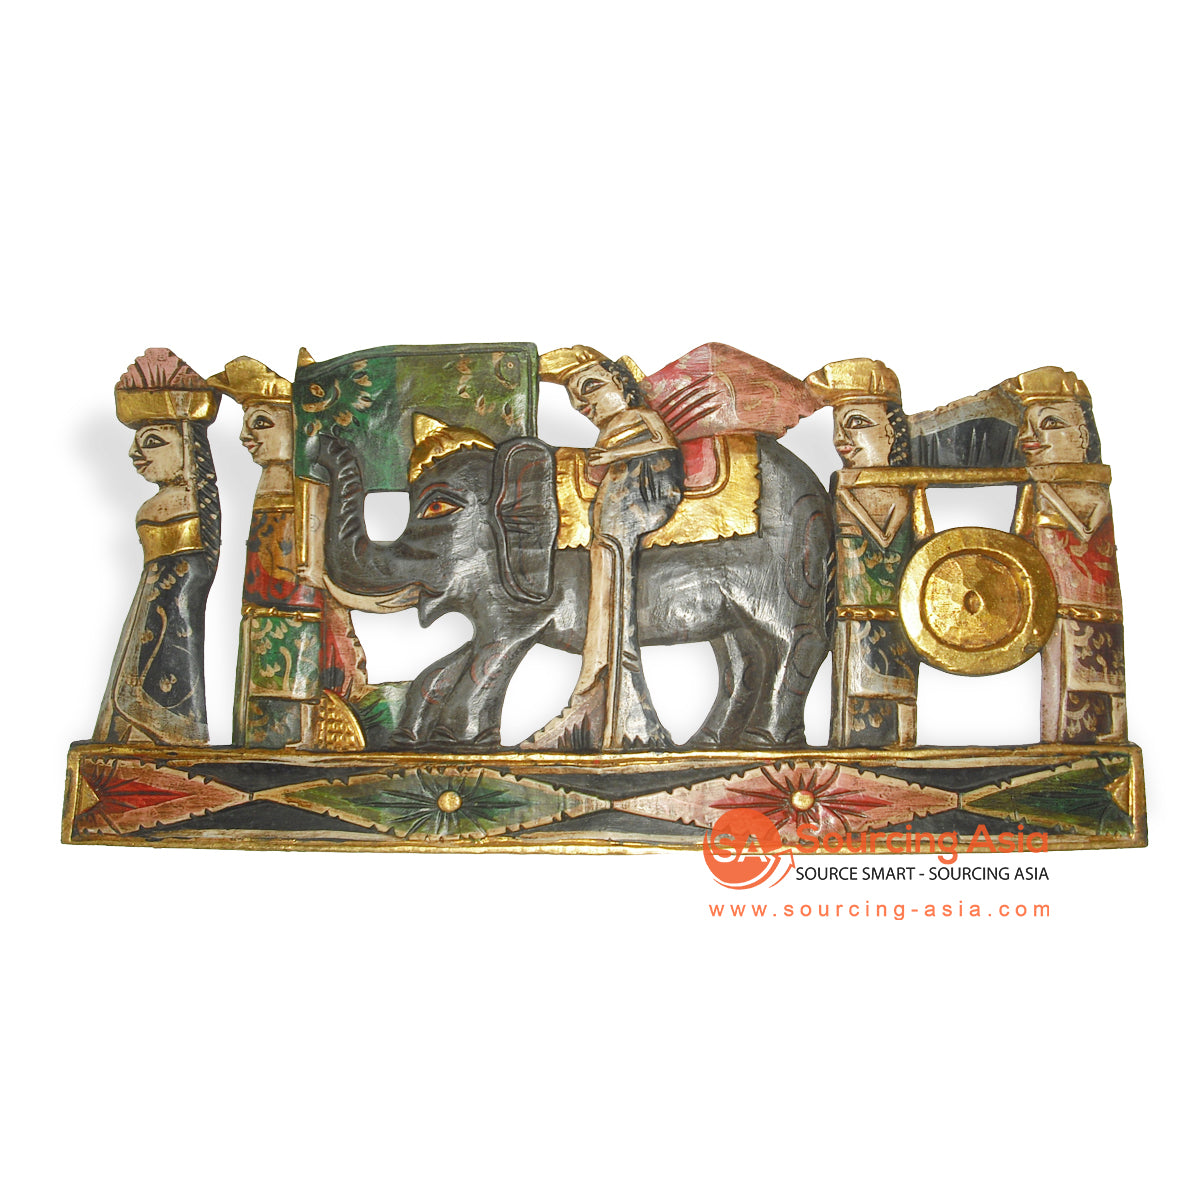 DEW013 WOODEN ELEPHANT PANEL WITH MELASTI TRADITION WALL DECORATION